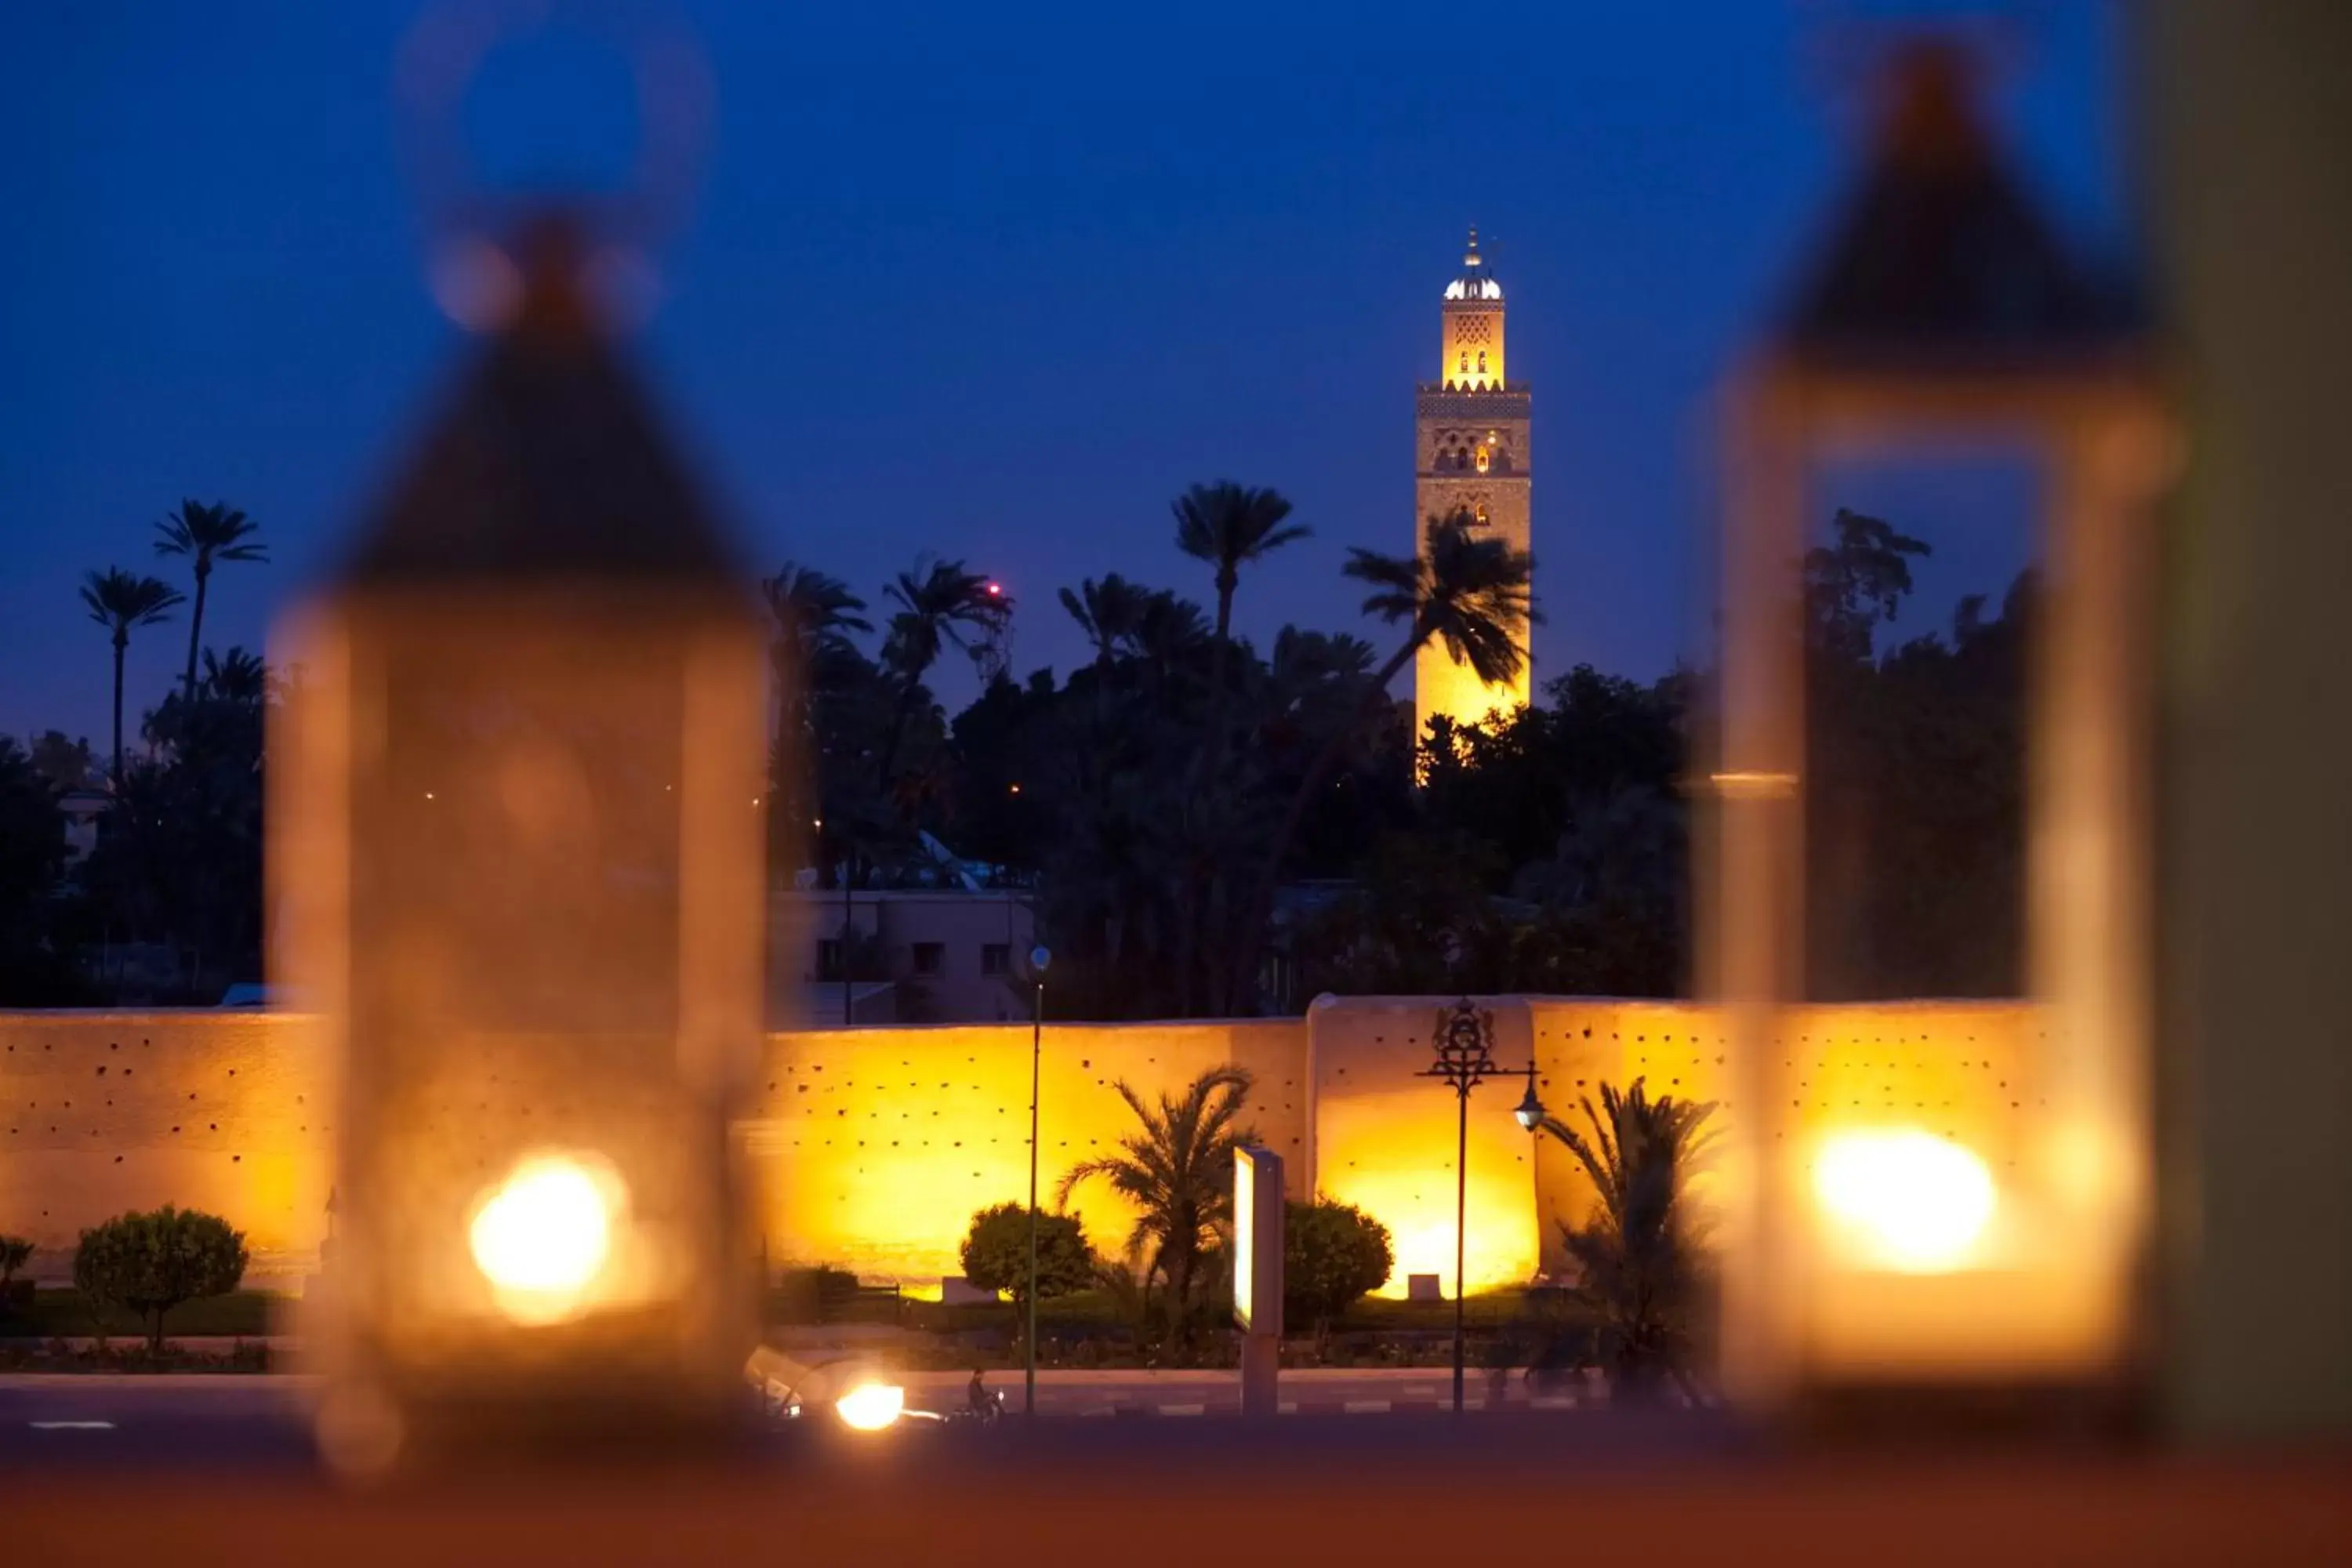 Property building in Sofitel Marrakech Lounge and Spa